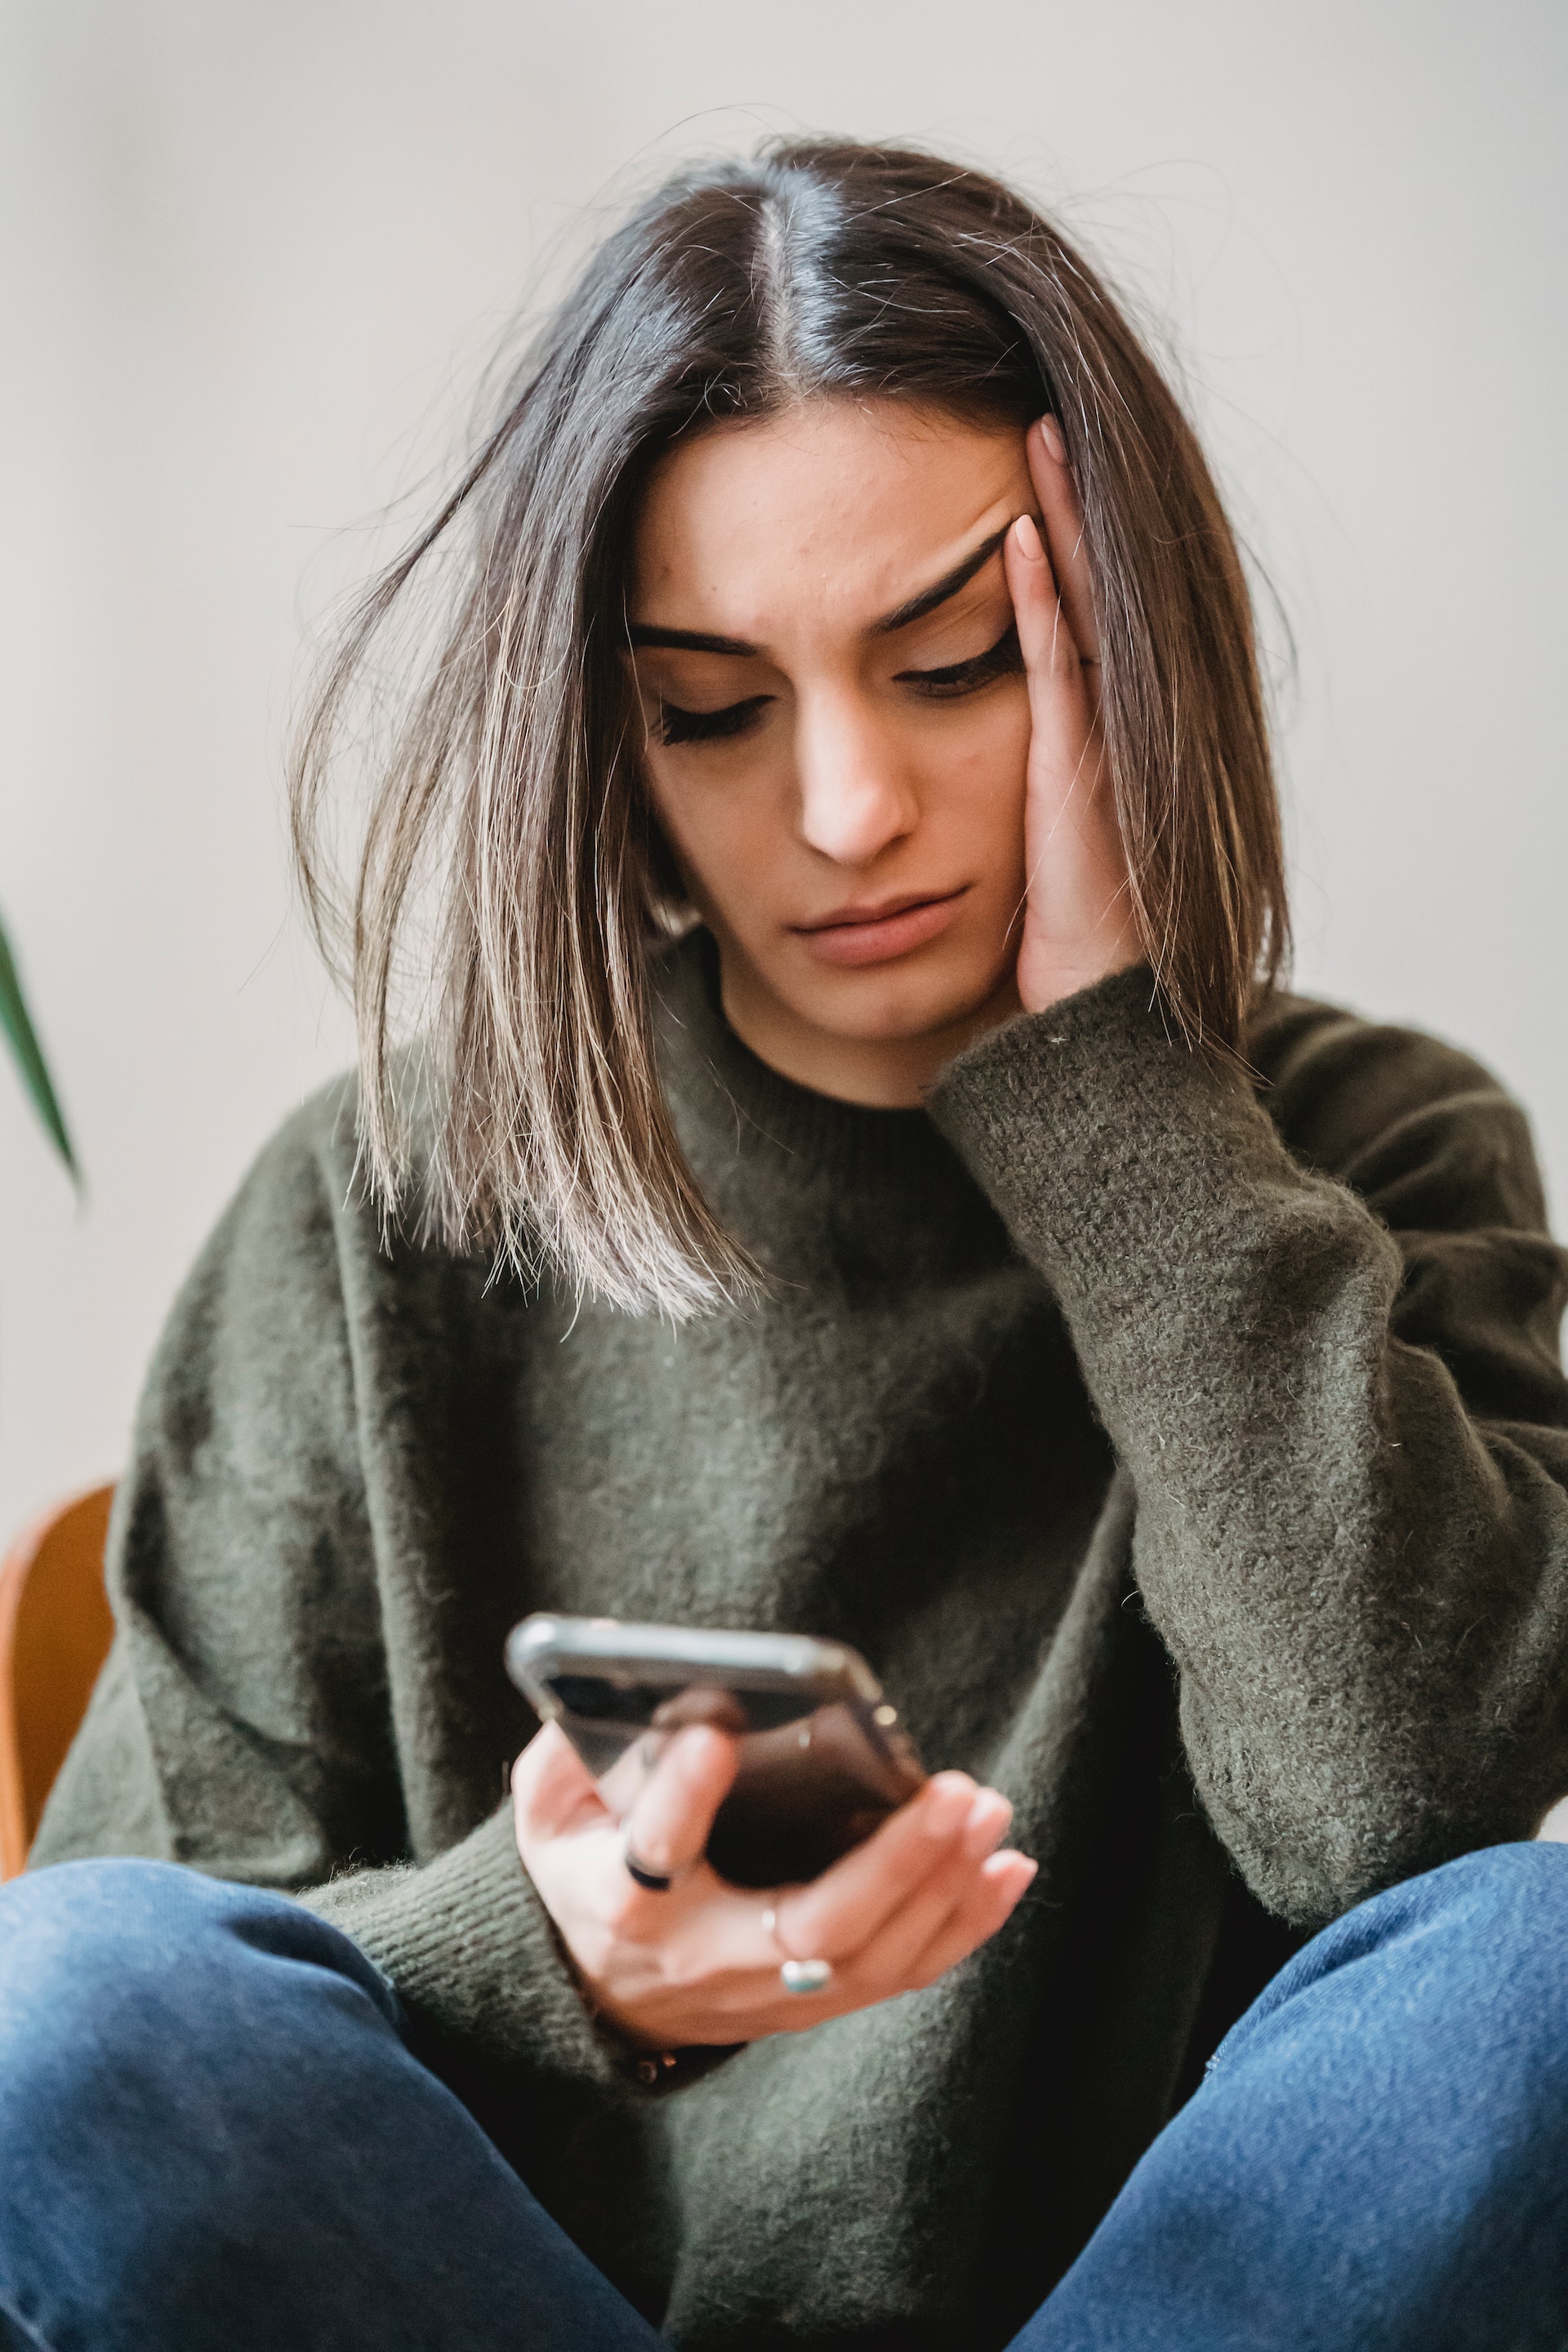 A concerned woman looking at her phone | Source: Pexels